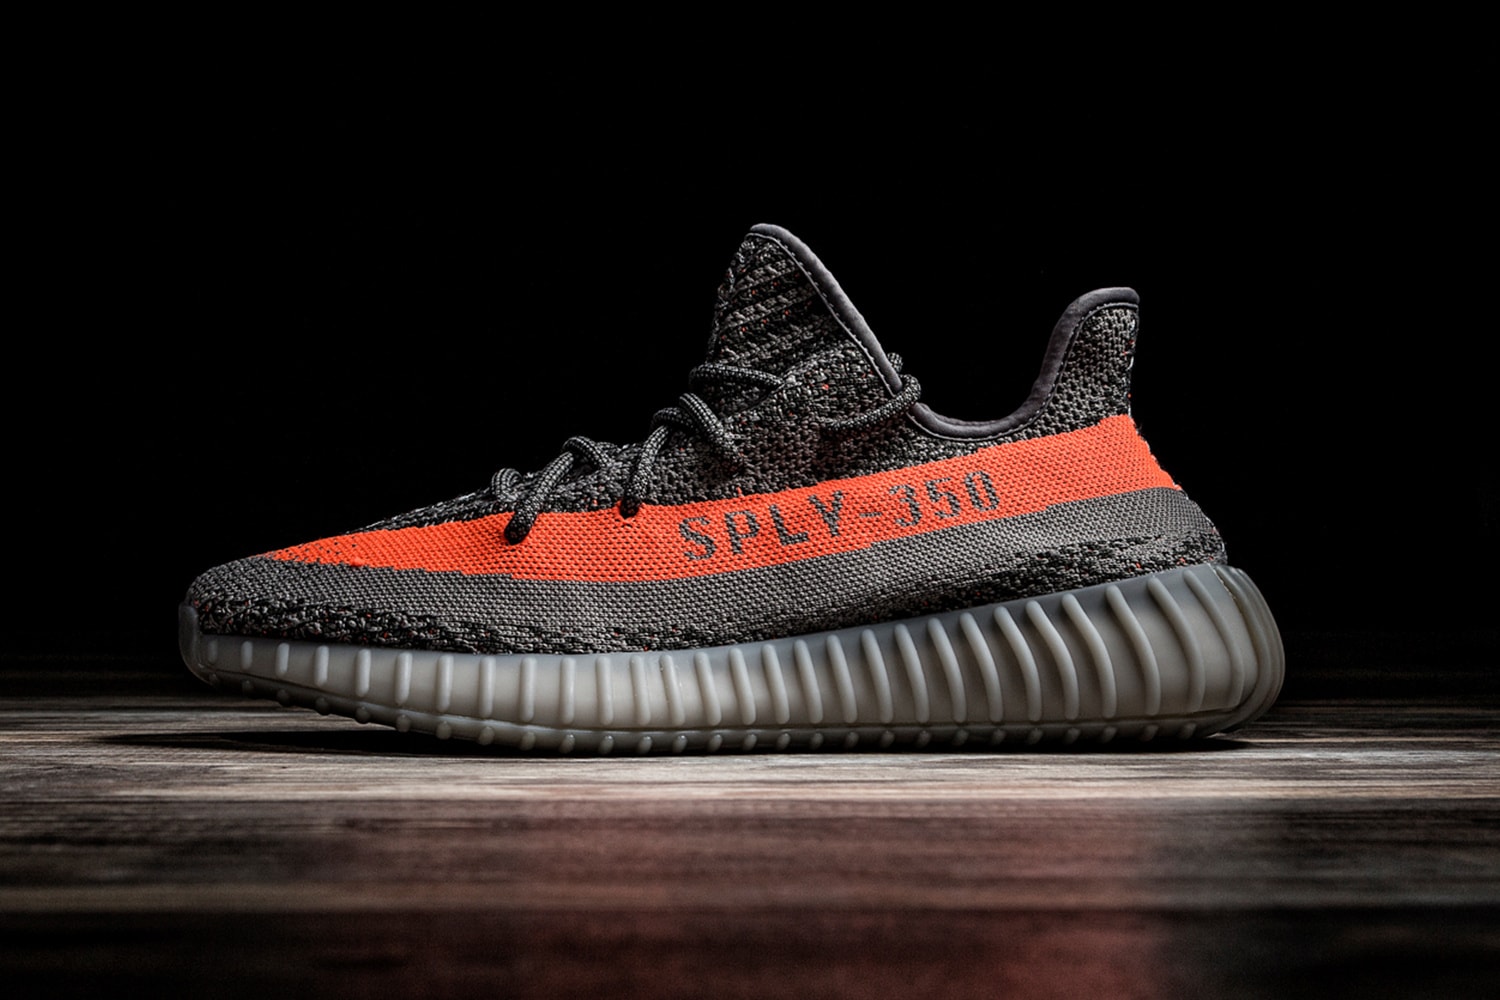 klud Taiko mave samlet set YEEZY Boost 350 V2 Raffle and Giveaway | Hypebeast